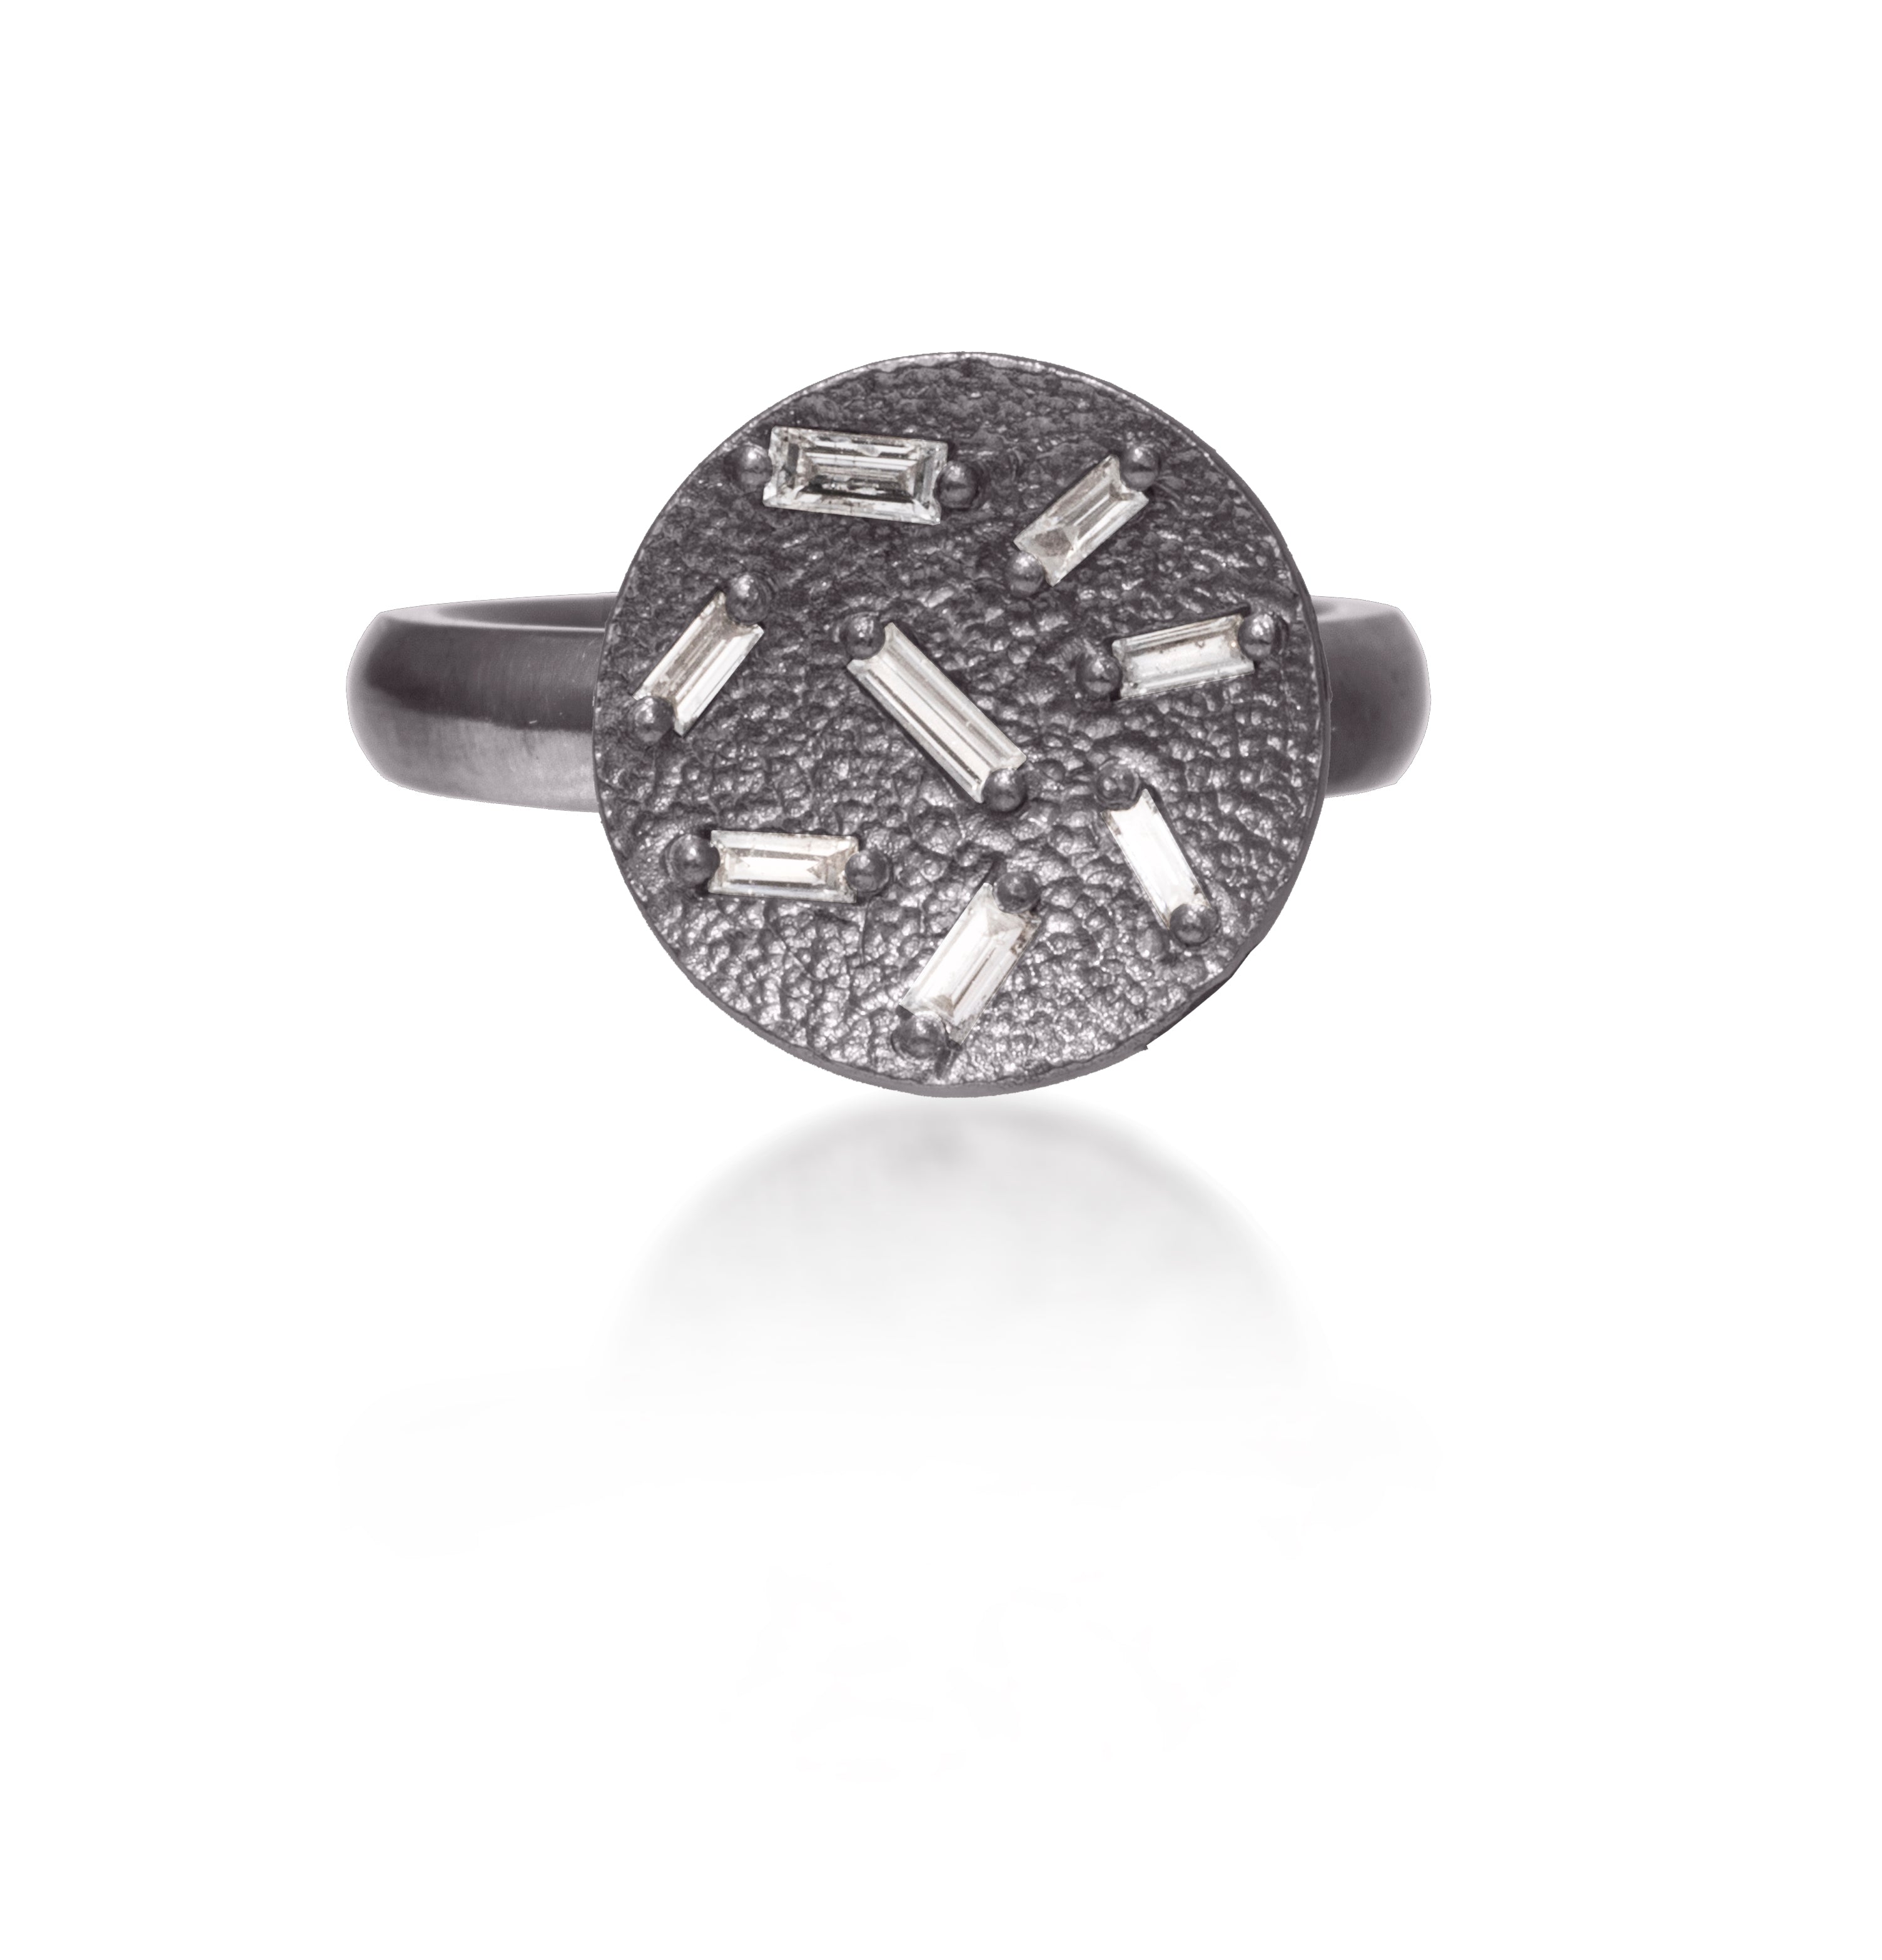 This small circular pendant ring is set with 8 white diamond baguettes. It is available in three richly textured color ways, oxidized silver, 18k gold and palladium.  The random angles of the baguettes catch the light in exciting ways when worn. 0.227 tcw.